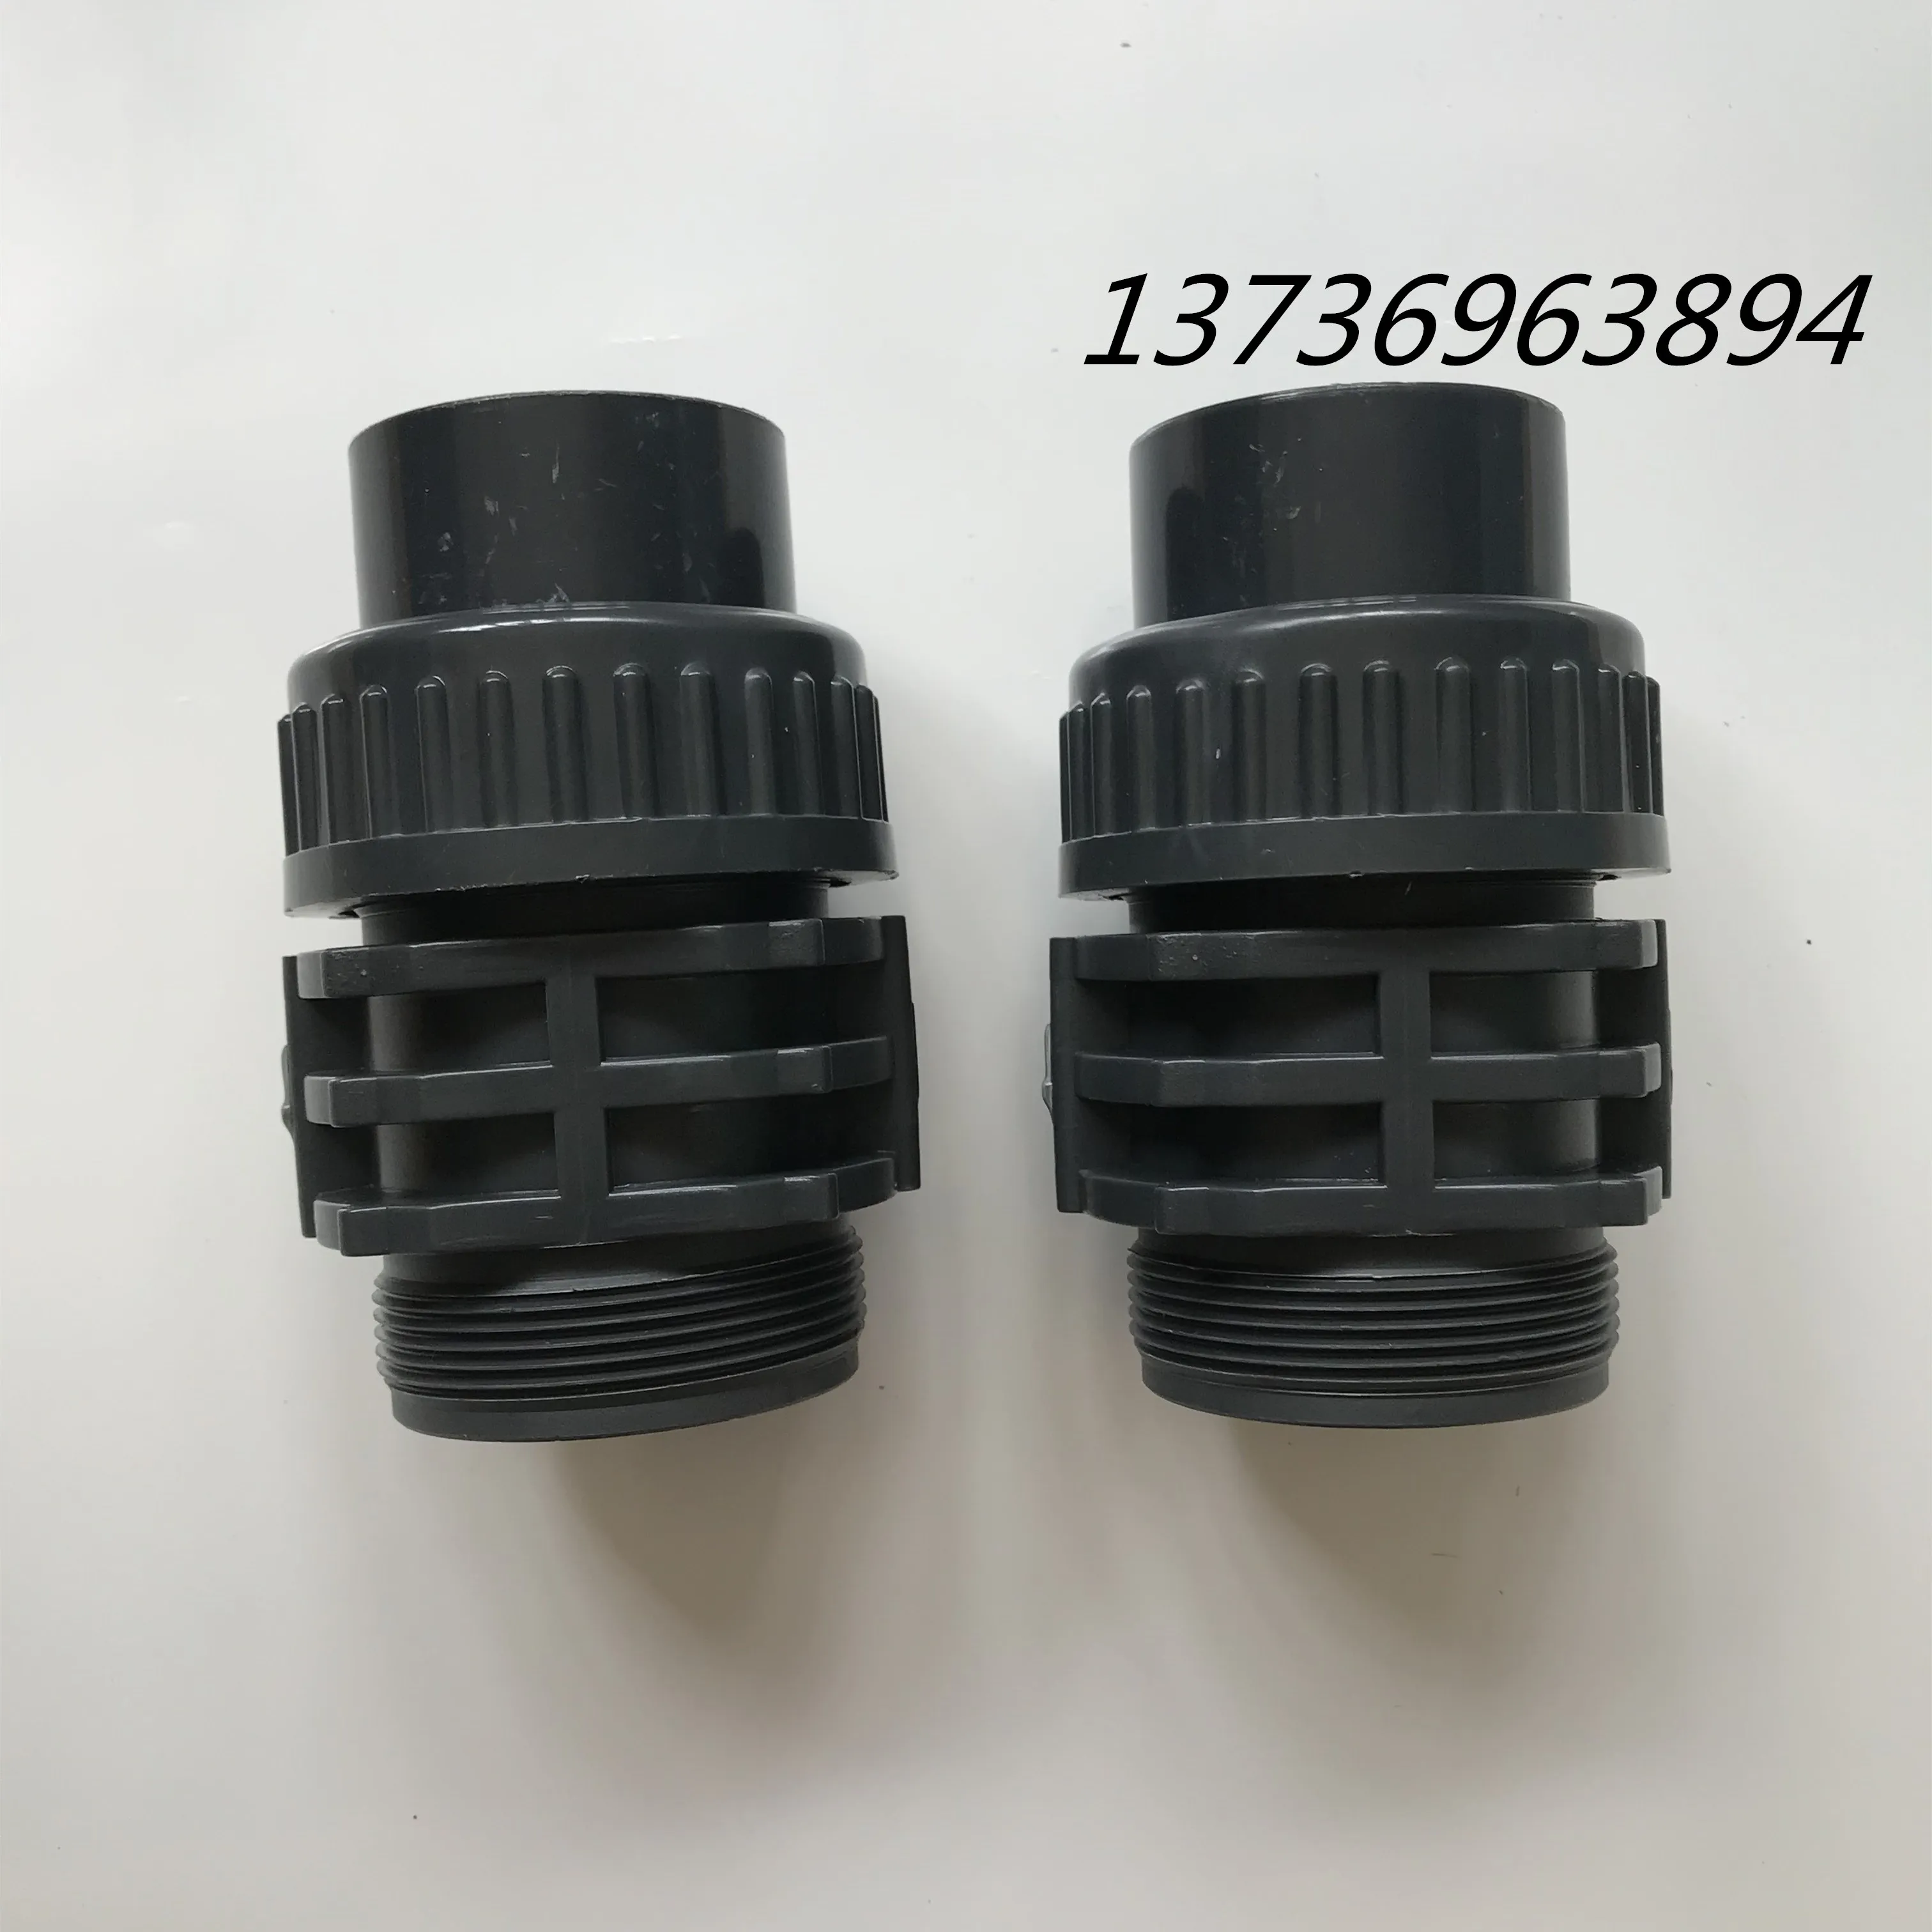 

Ailipu metering pump accessories check valve JZM-A1200 0.35-PHS0-0-0 in and out check valve check